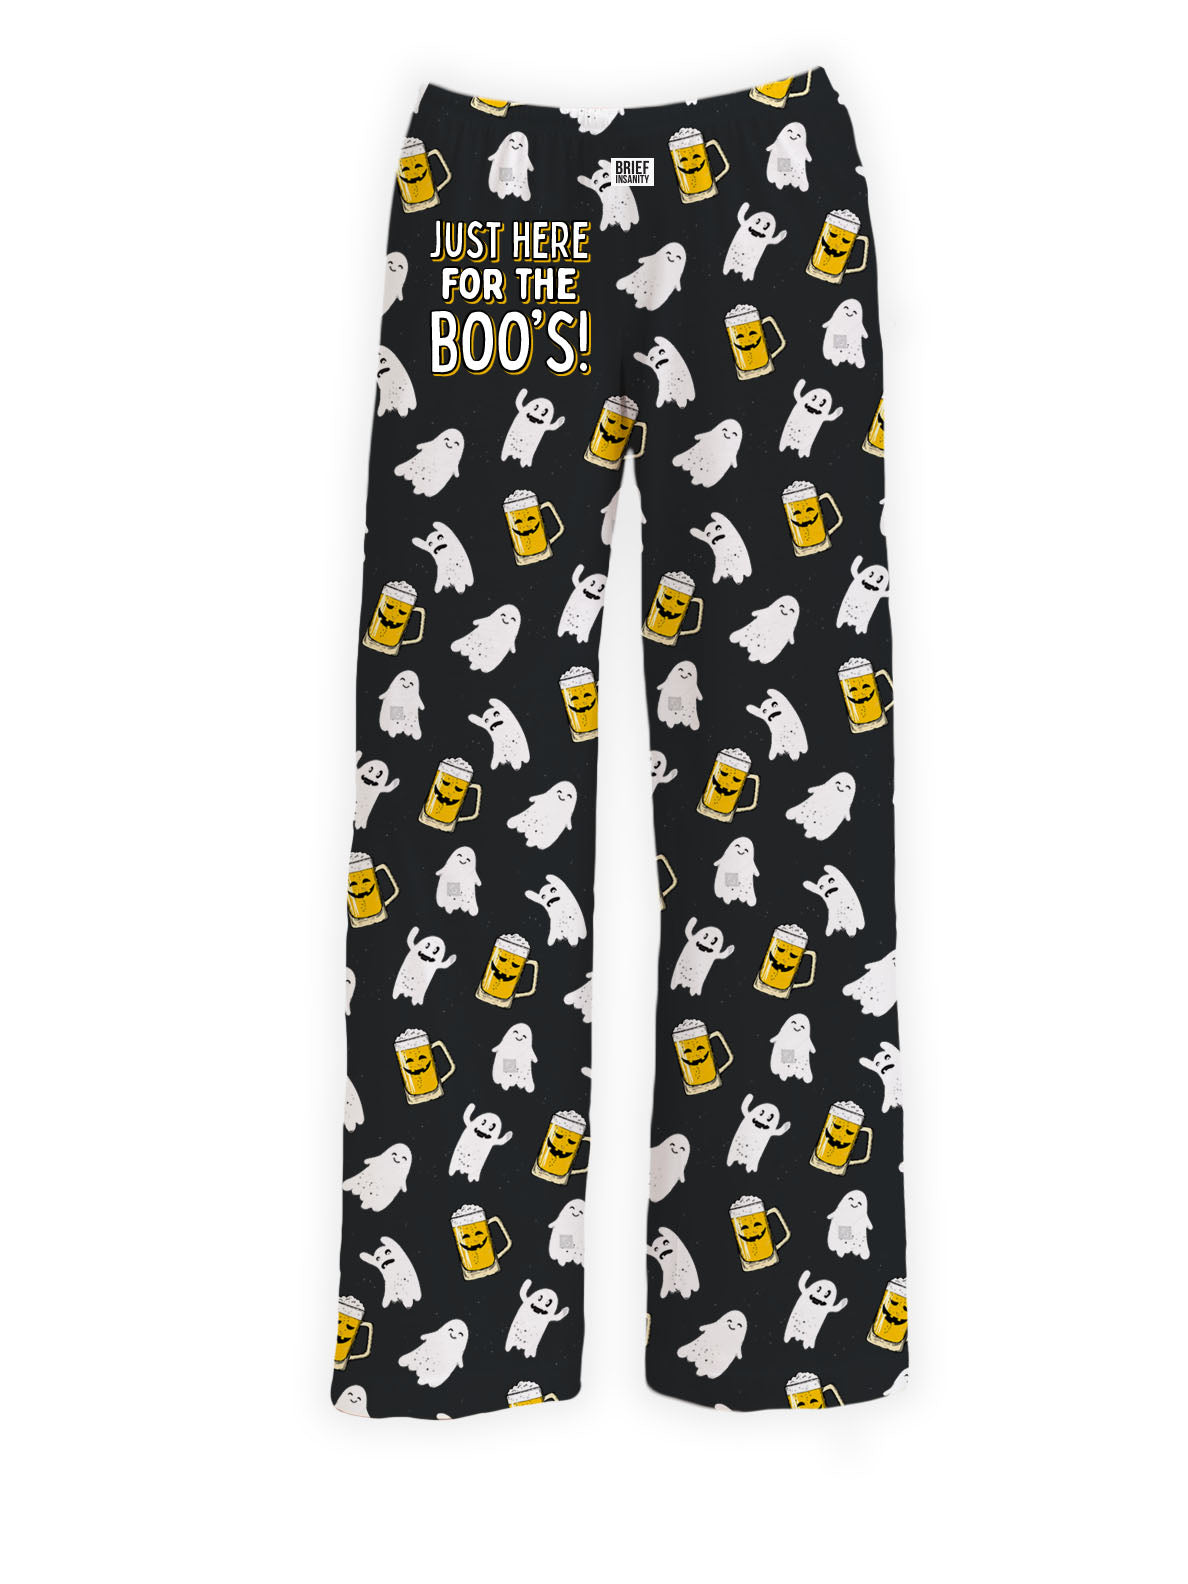 BRIEF INSANITY Just Here for the Boo's! Pajama Lounge Pants